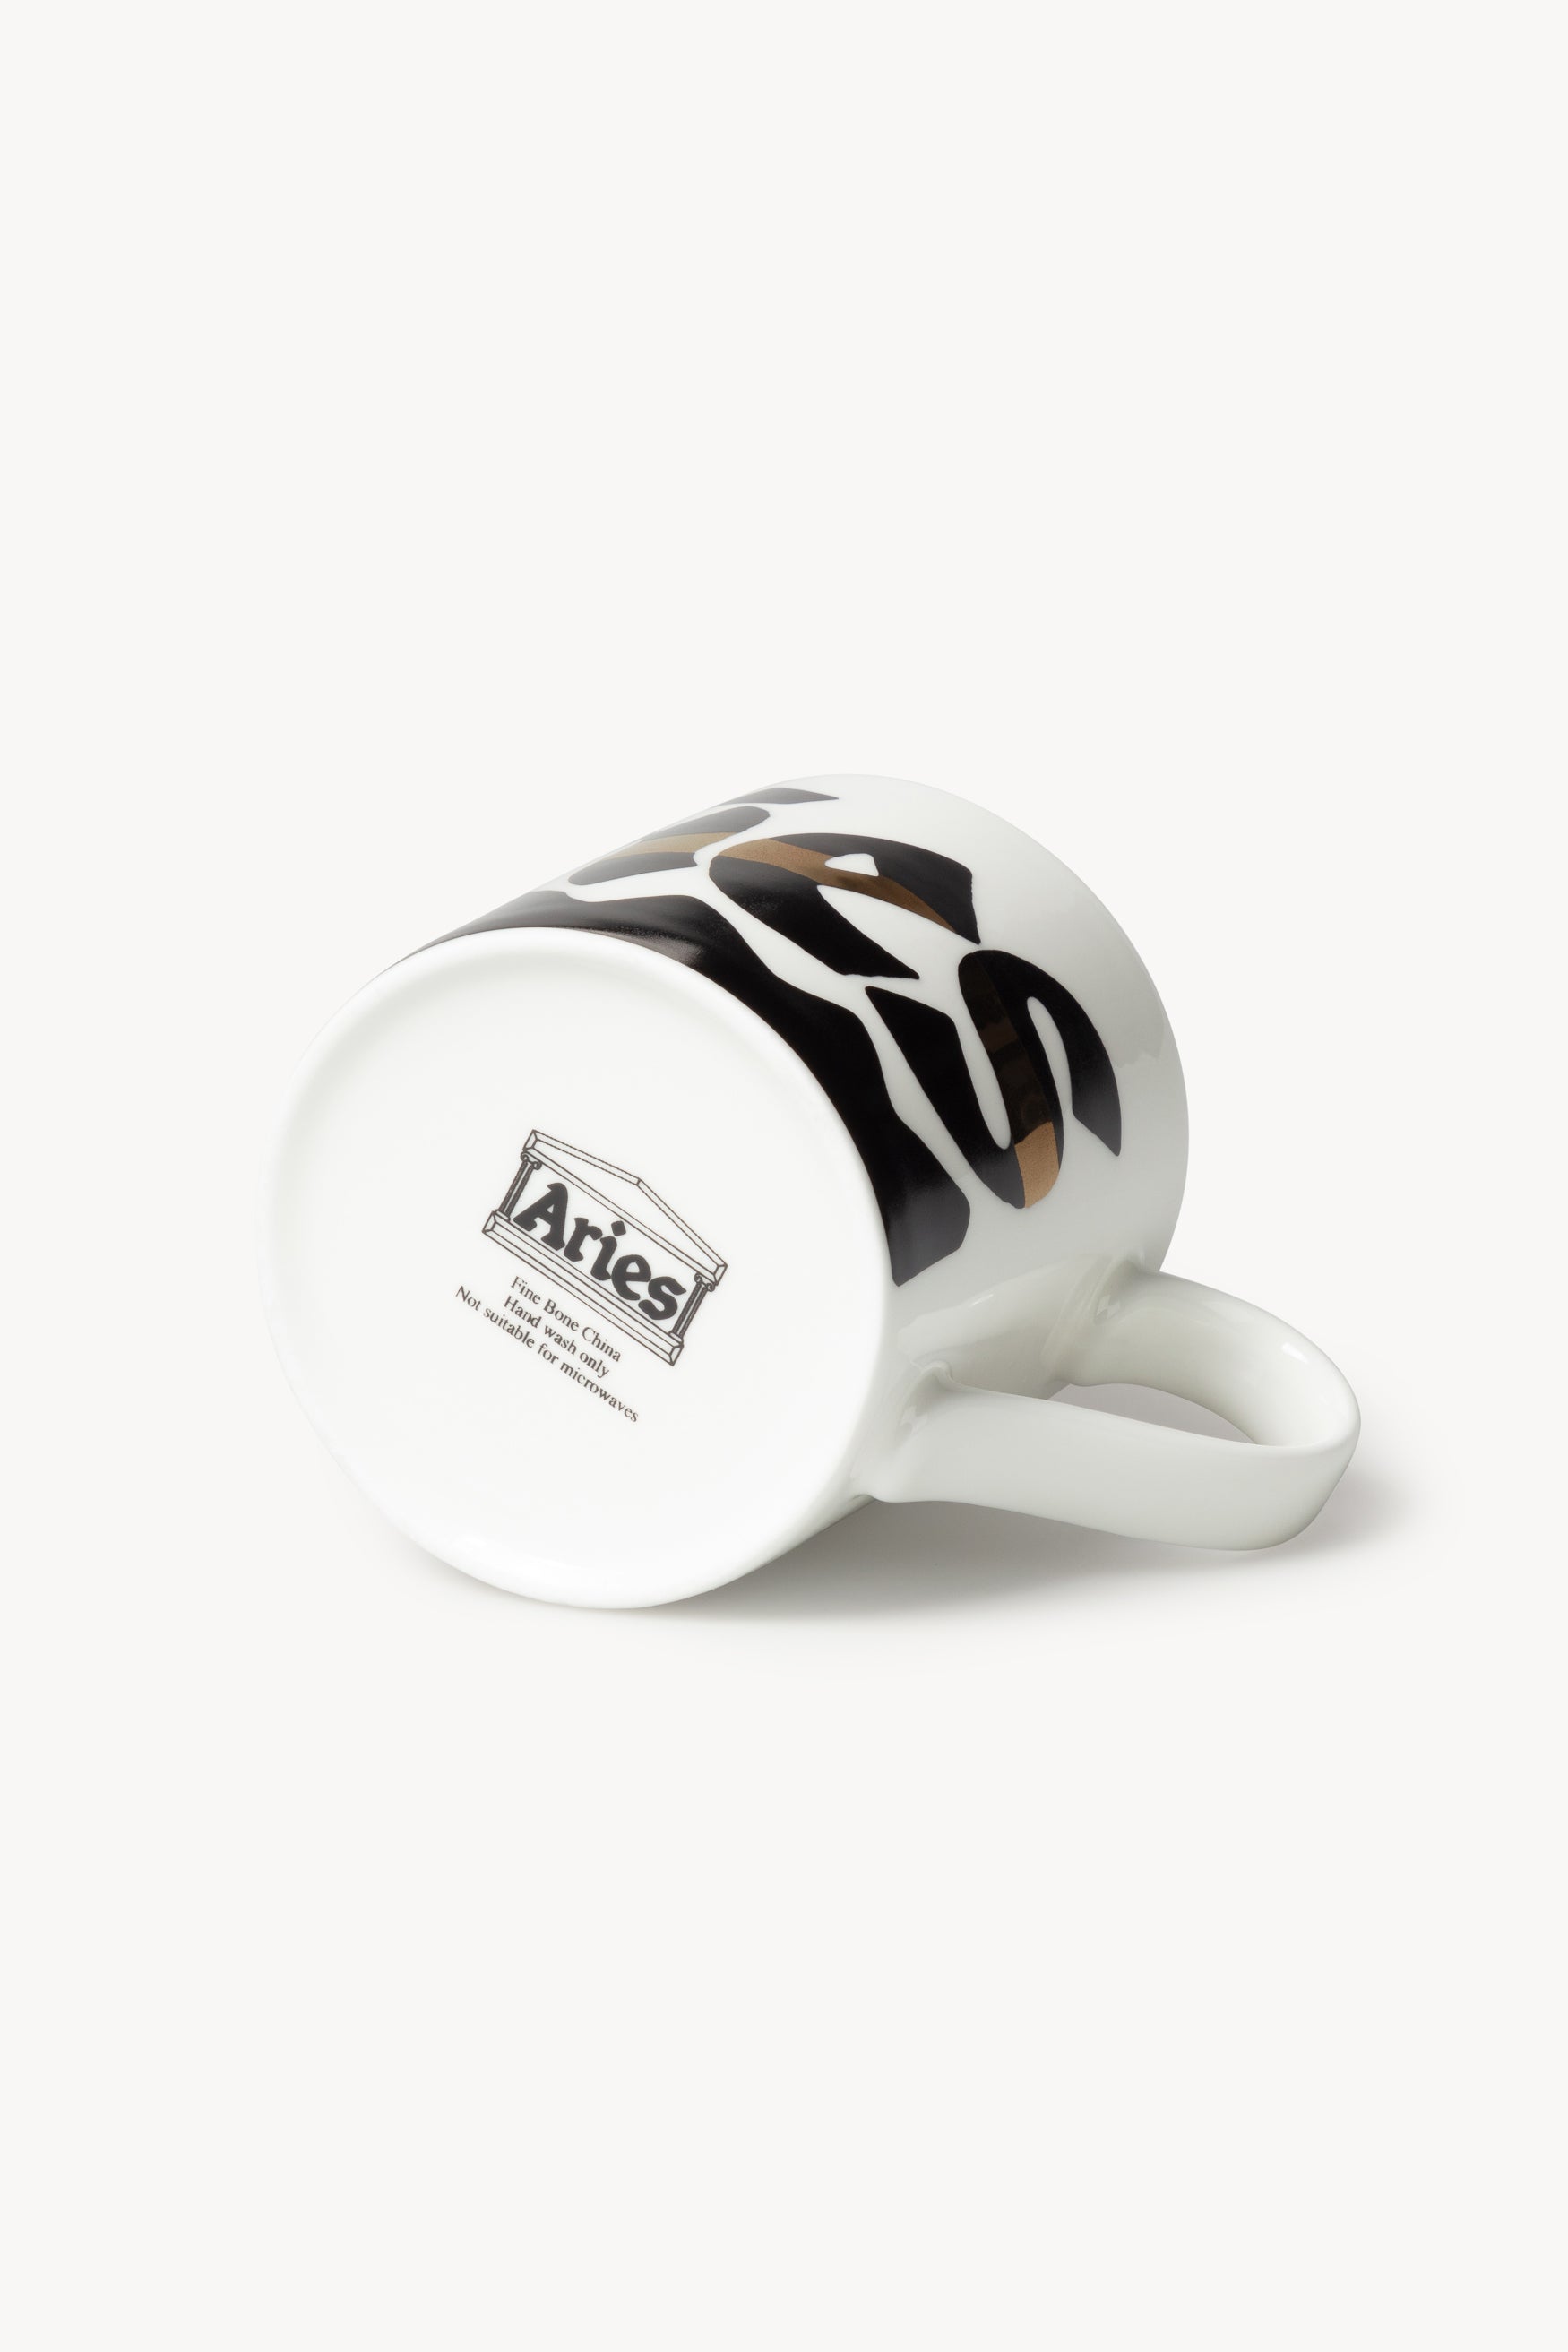 Load image into Gallery viewer, Aries Outdoors Mug